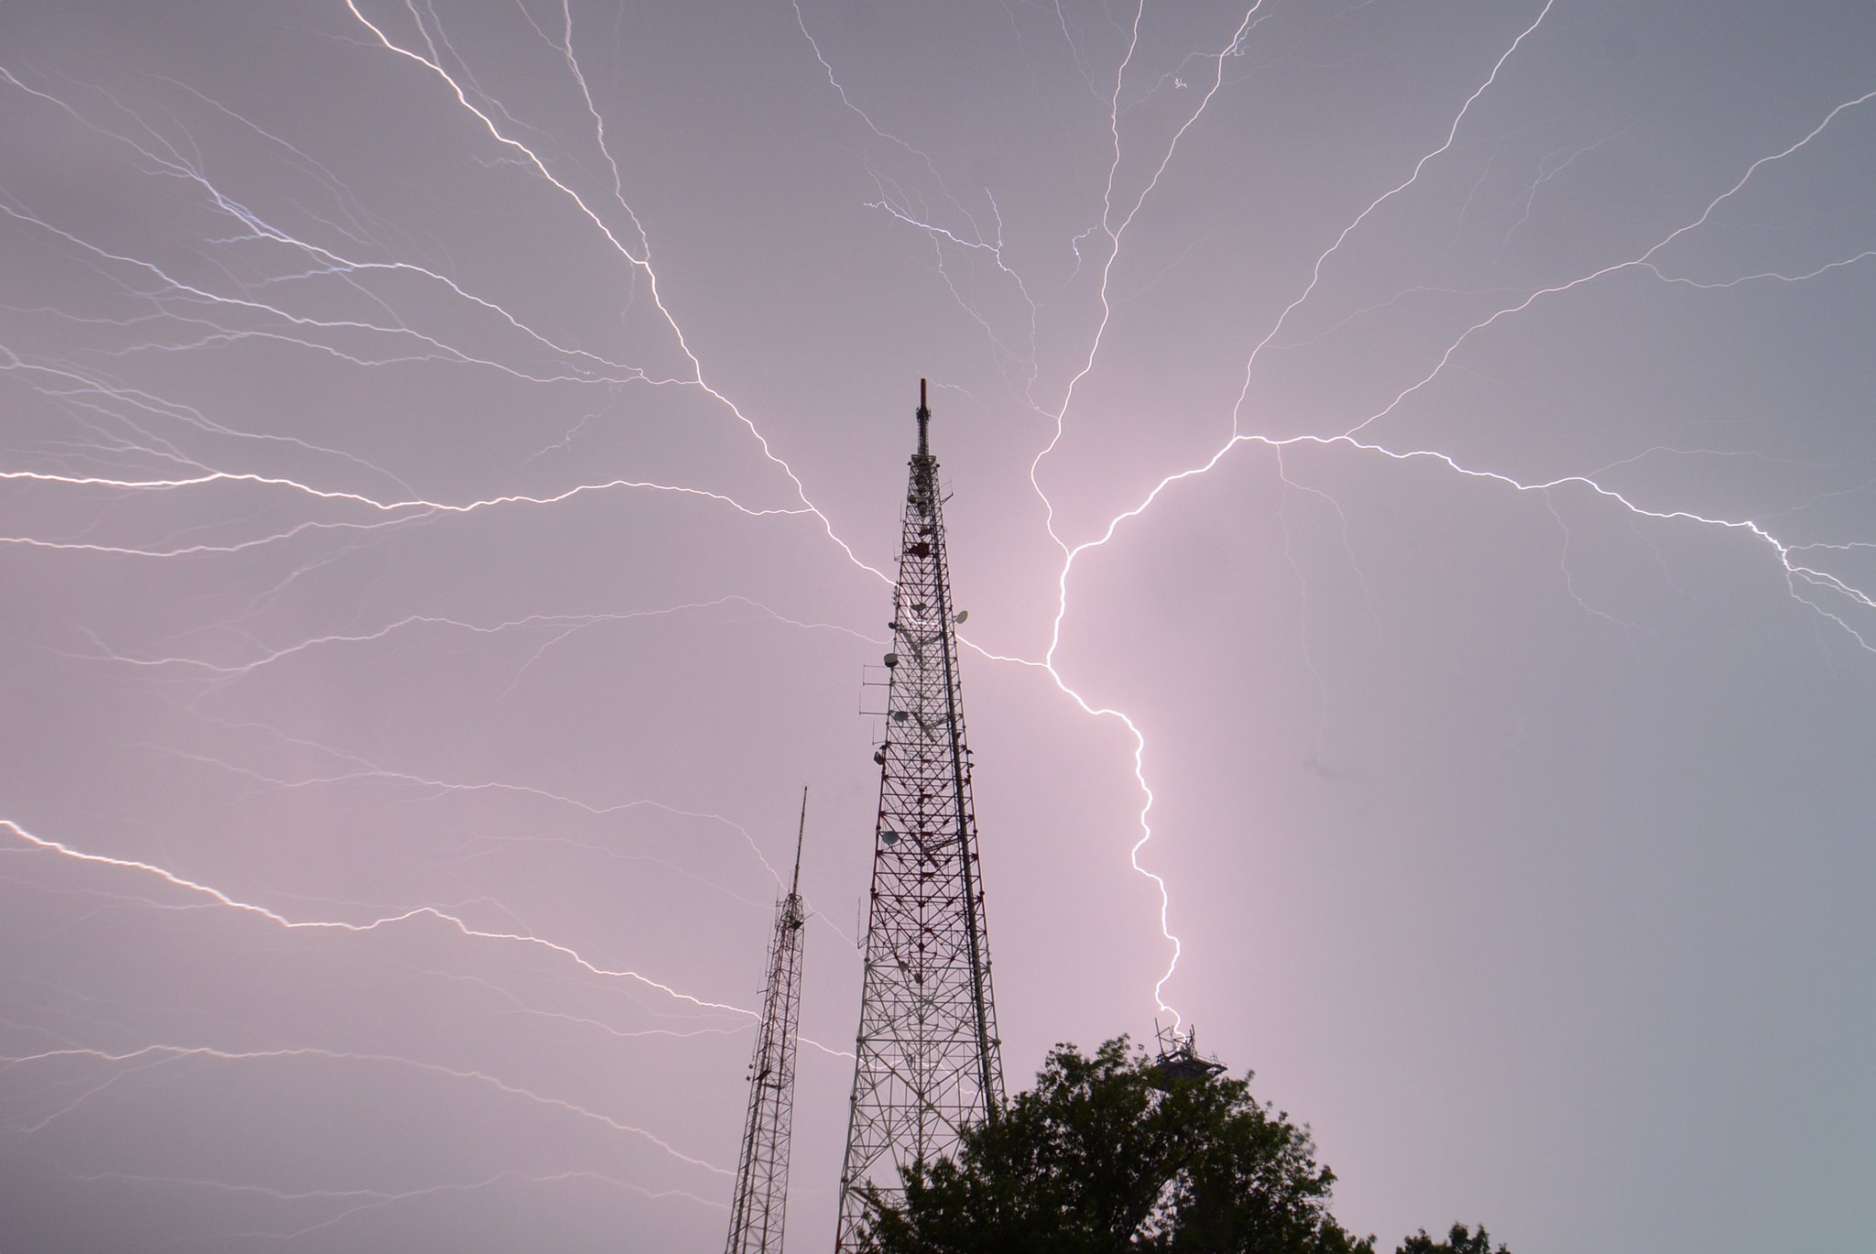 A thunderstorm blasts spider lightning over Tenleytown (WTOP/Dave Dildine)